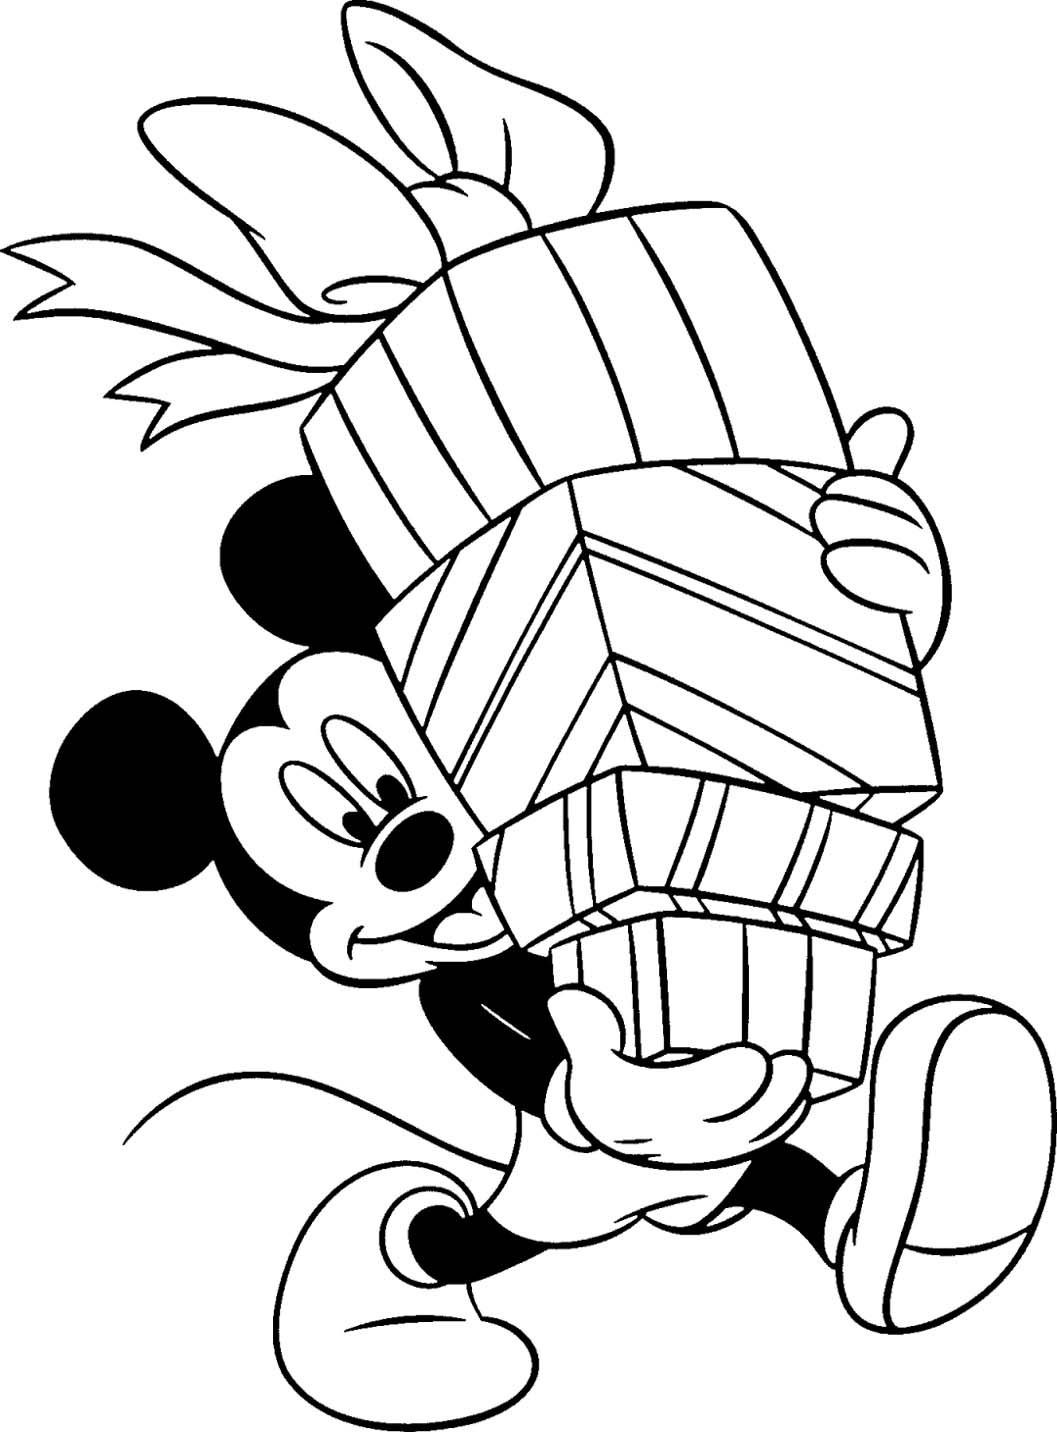 Mickey Mouse Christmas Coloring Pages - Best Coloring ...